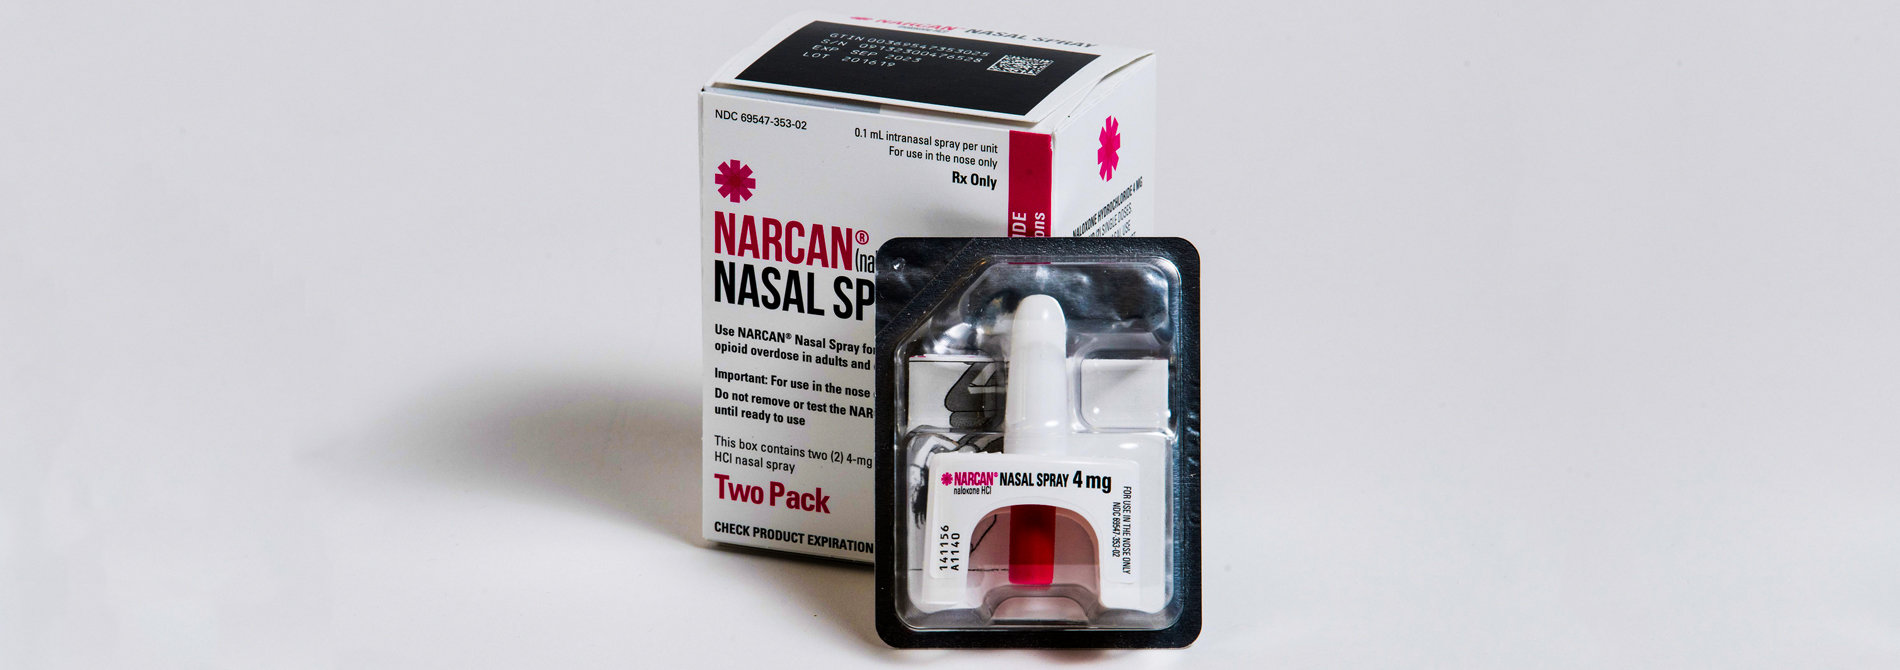 How Do You Use Narcan?